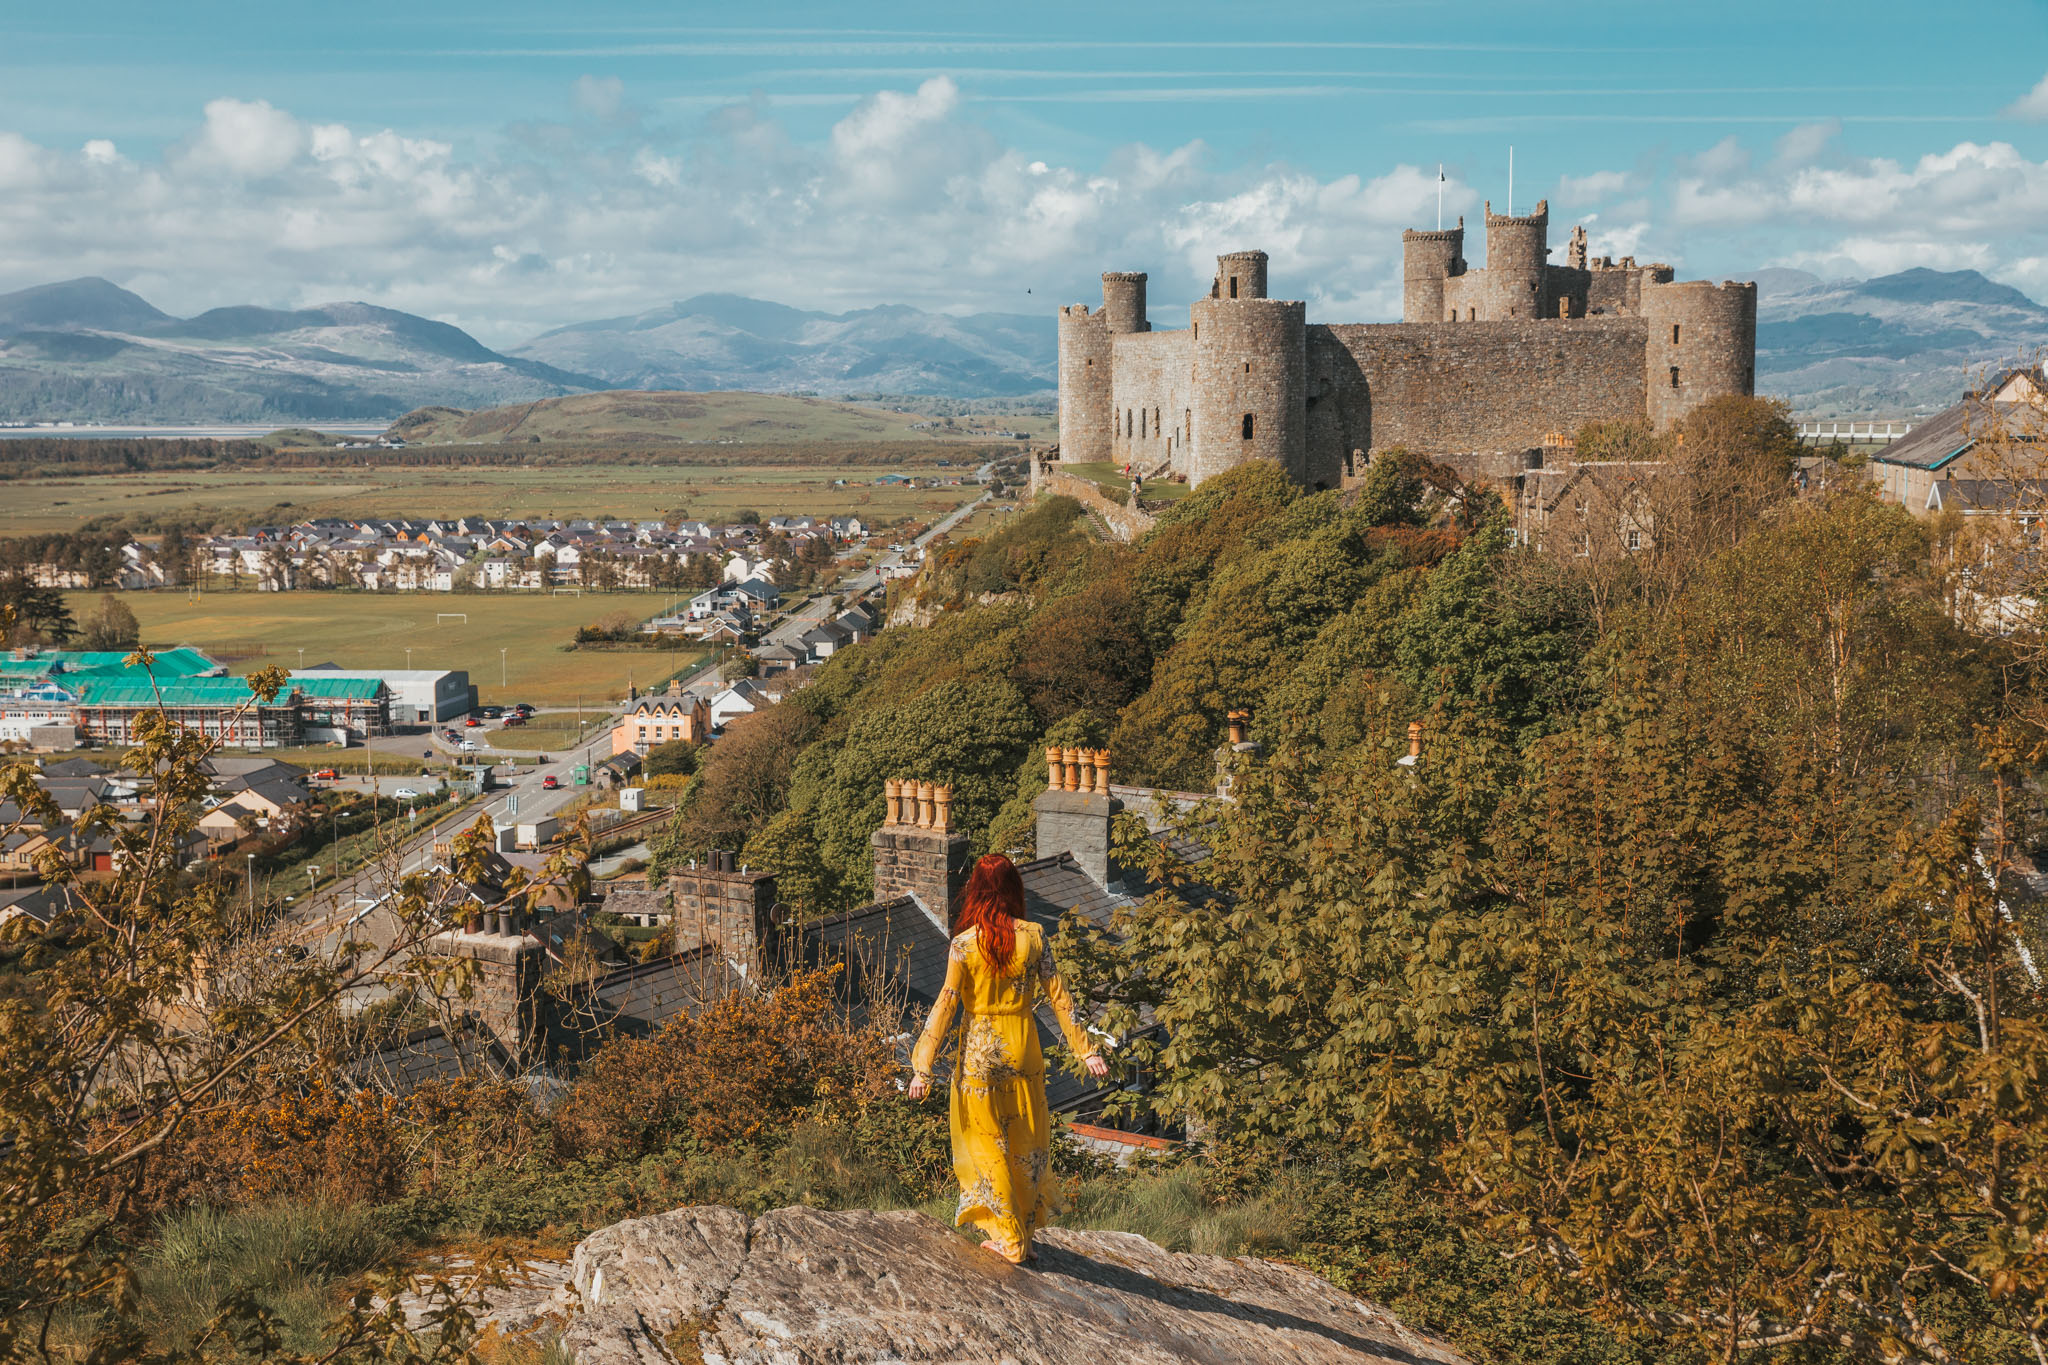 Harlech Castle // The Most Beautiful Places to Visit in Wales // #readysetjetset #wales #uk #welsh #travel #photospots #blogpost